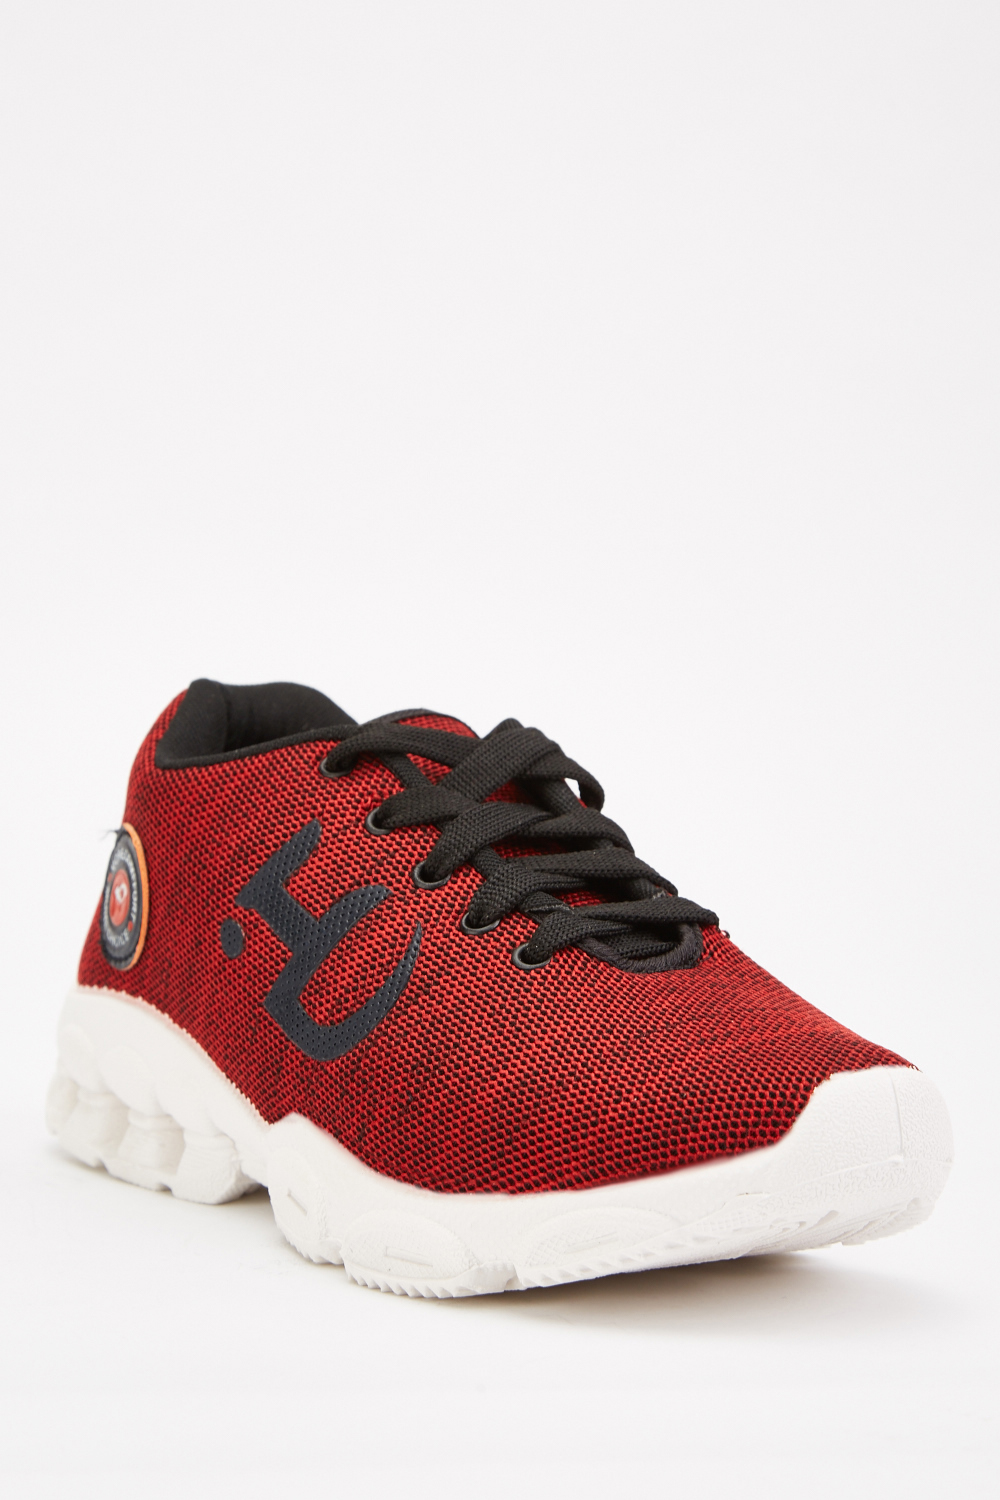 Dark Red Textured Mens Trainers - Just $7